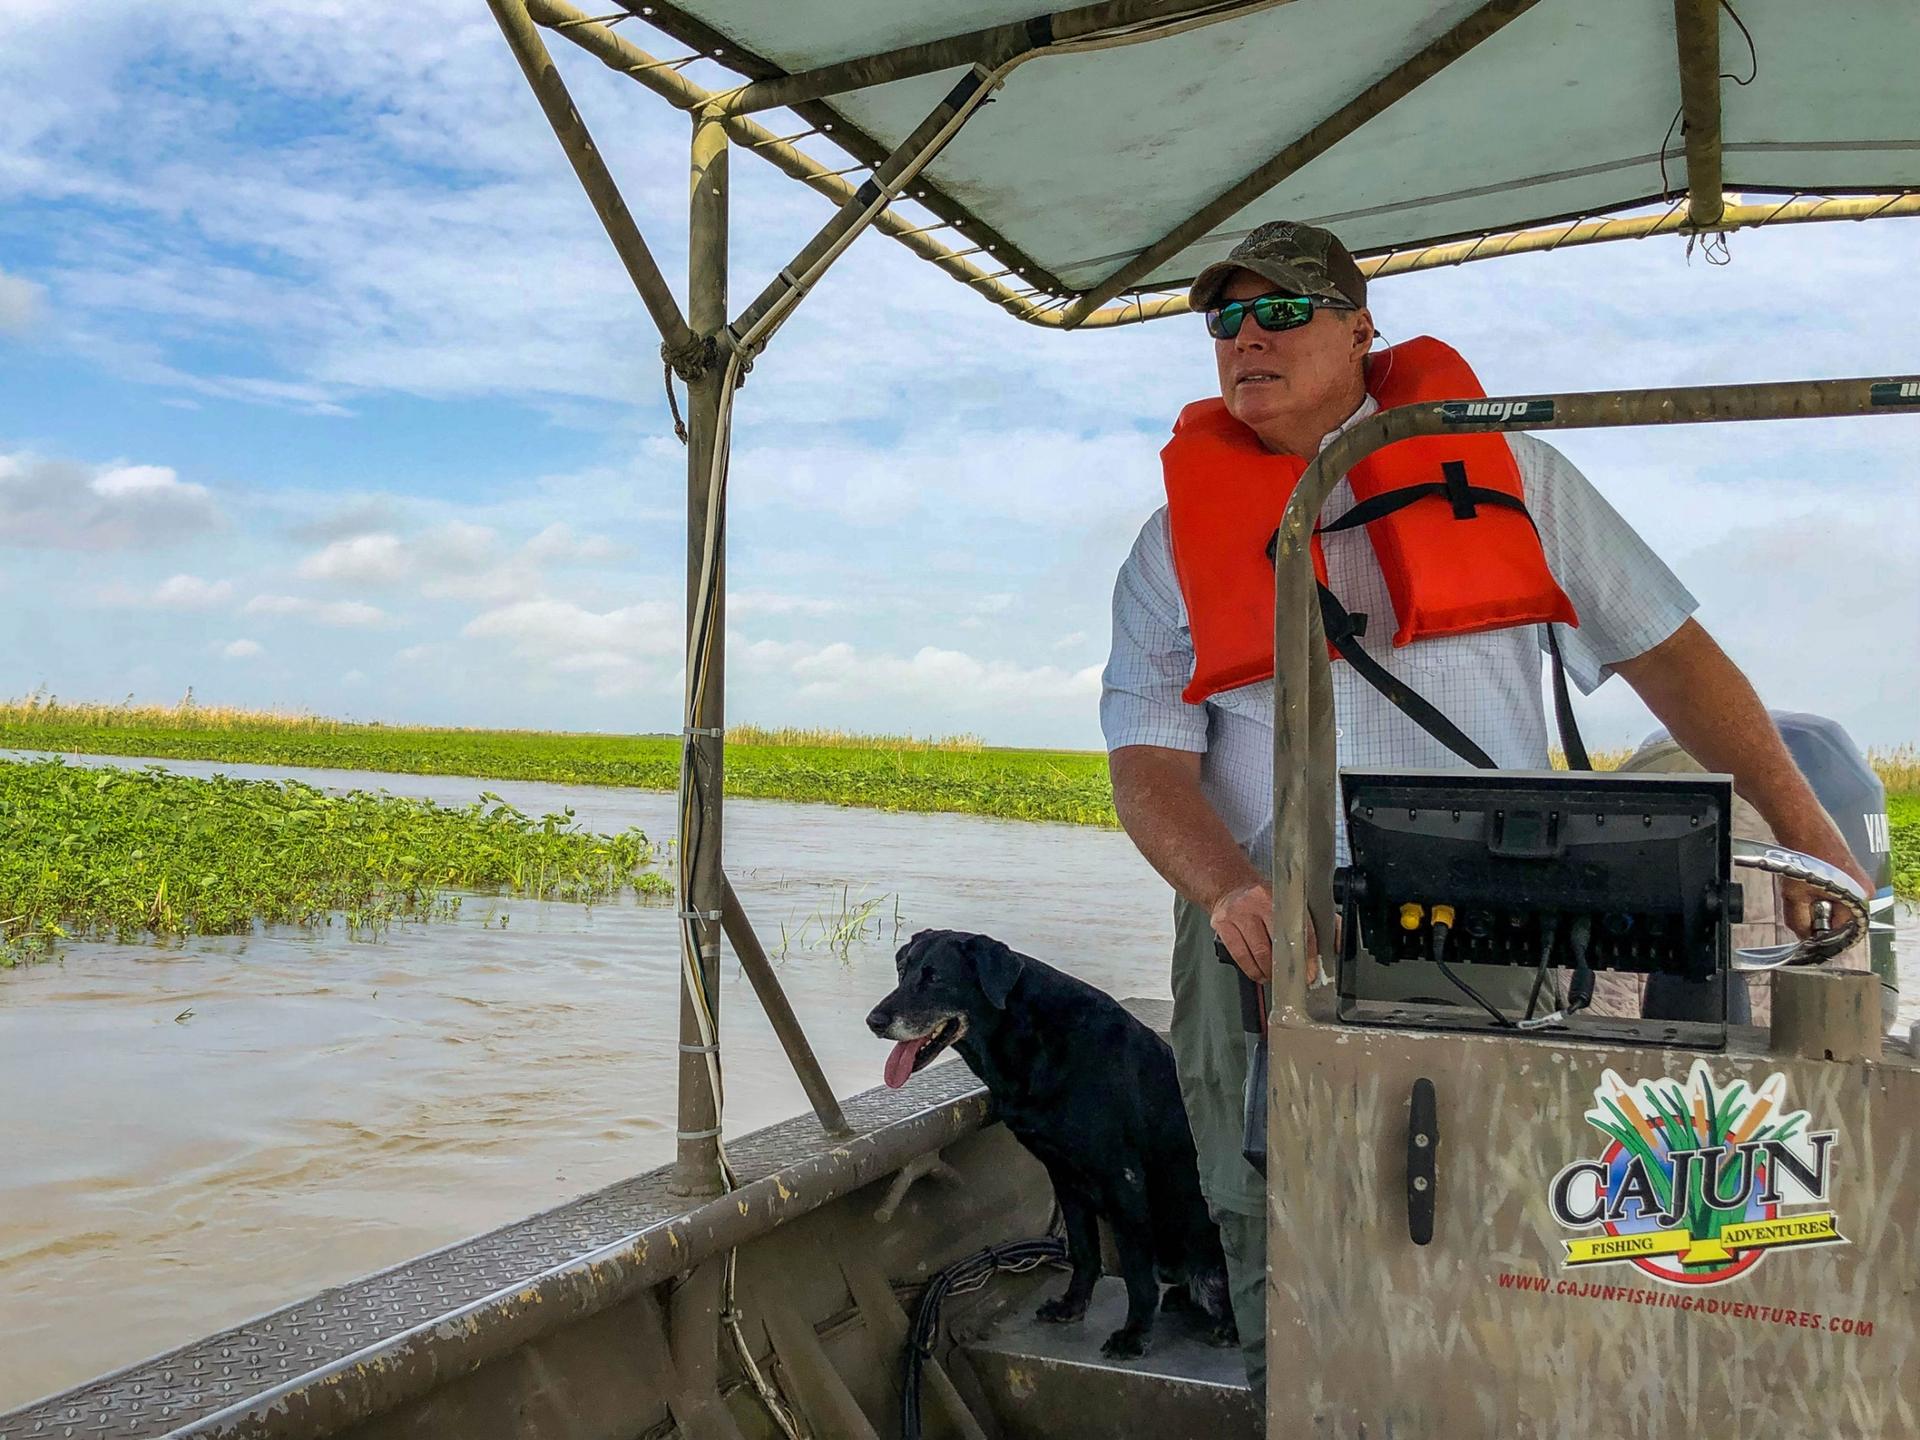 Ryan Lambert is shown piloting a flat bottom boat with a dark colored dog sitting next to him.